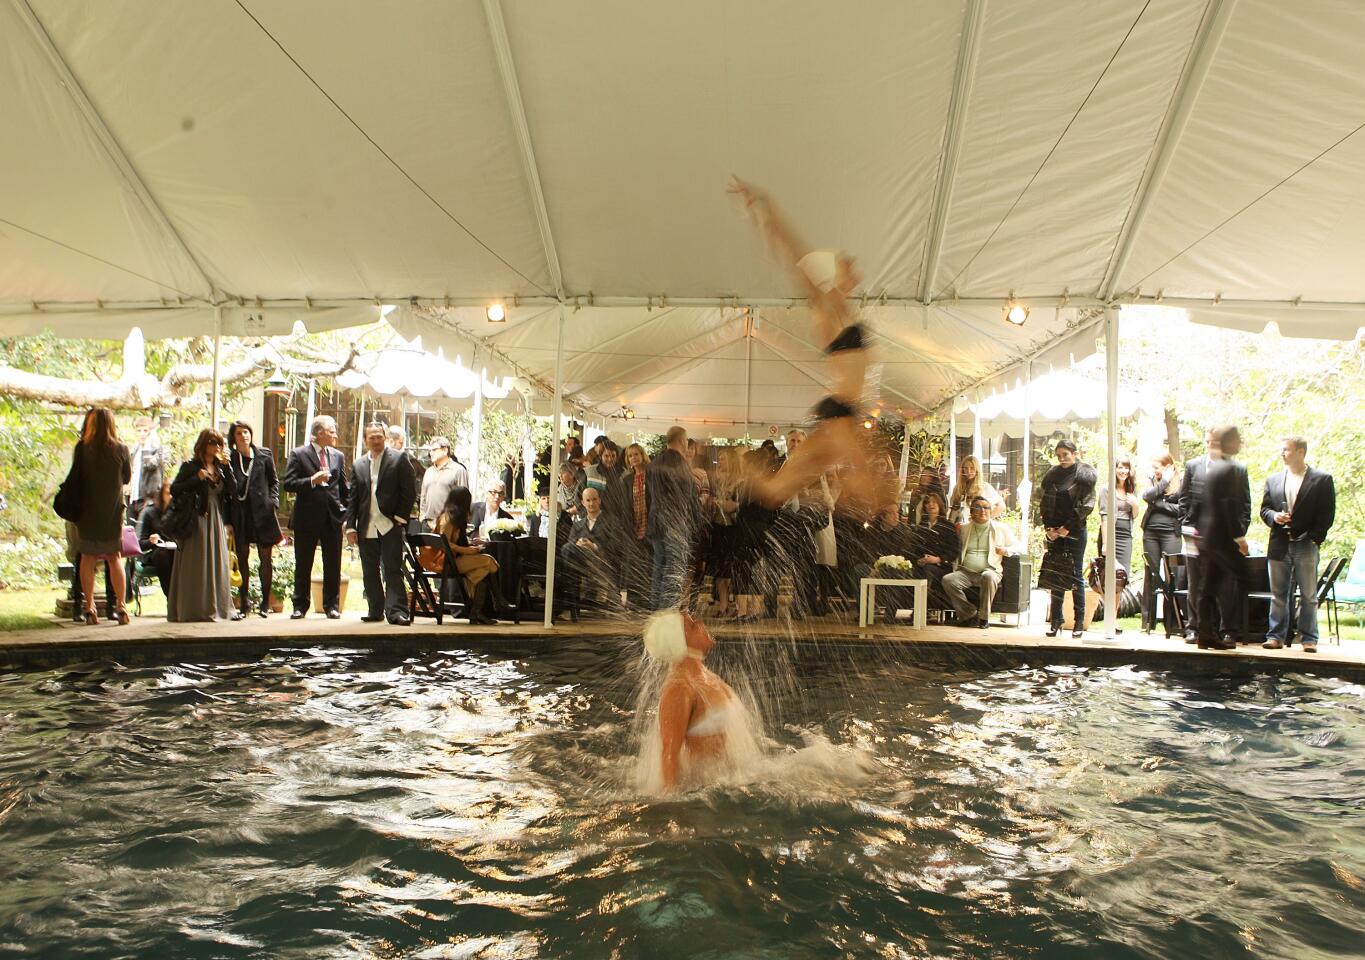 Members of a synchronized swimming team perform at a luncheon hosted by Robert Evans at a private residence on Feb. 21, 2008, in Beverly Hills.